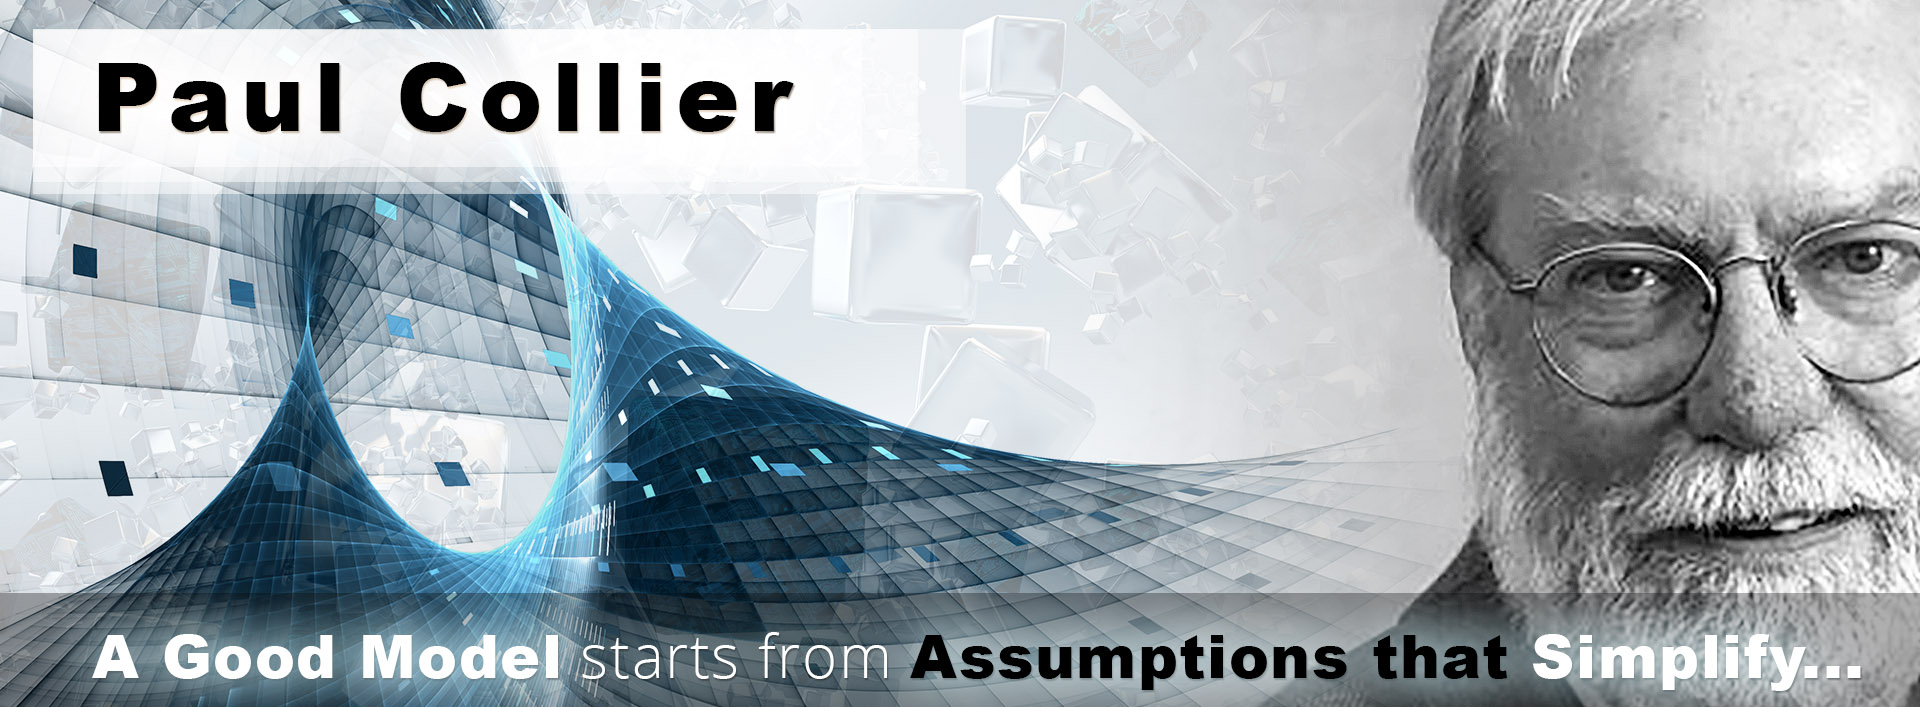 Paul-Collier__A-good-model-starts-from assumptions-that-simplify...